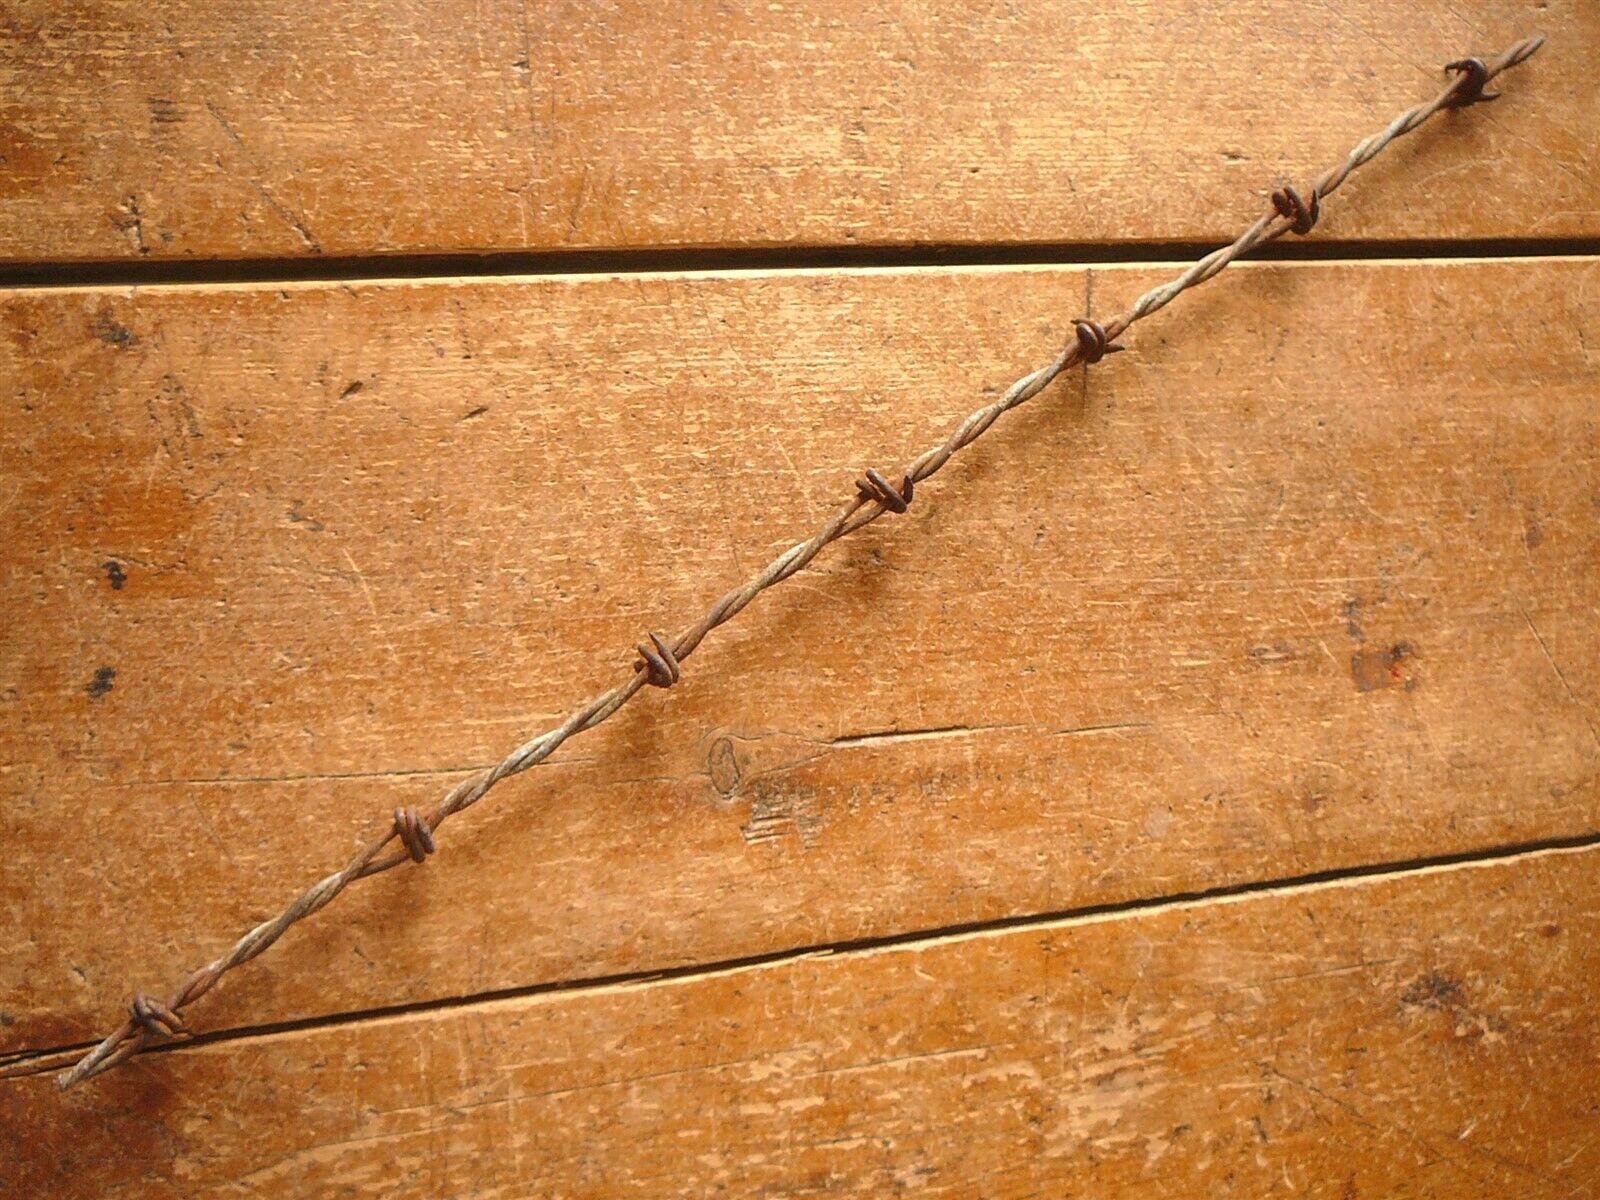 Haish Square S Walking Cane Black Barbs Galvanized Lines - Antique Barbed Wire